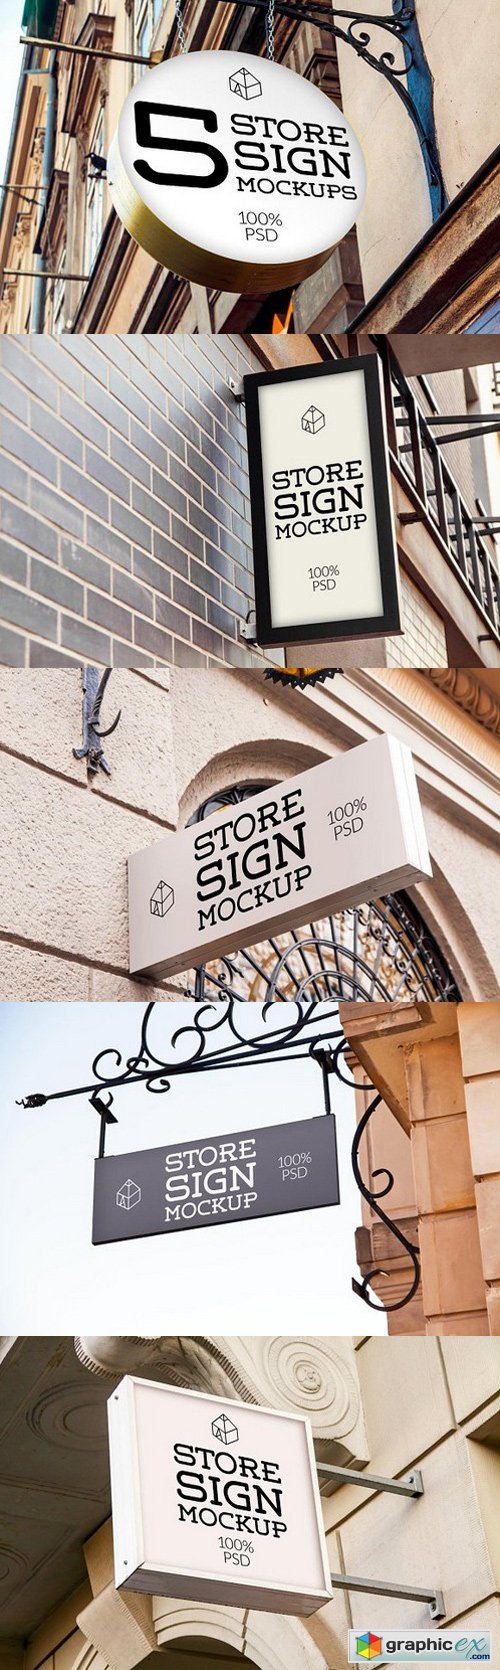 Store Signs Mock-ups 3